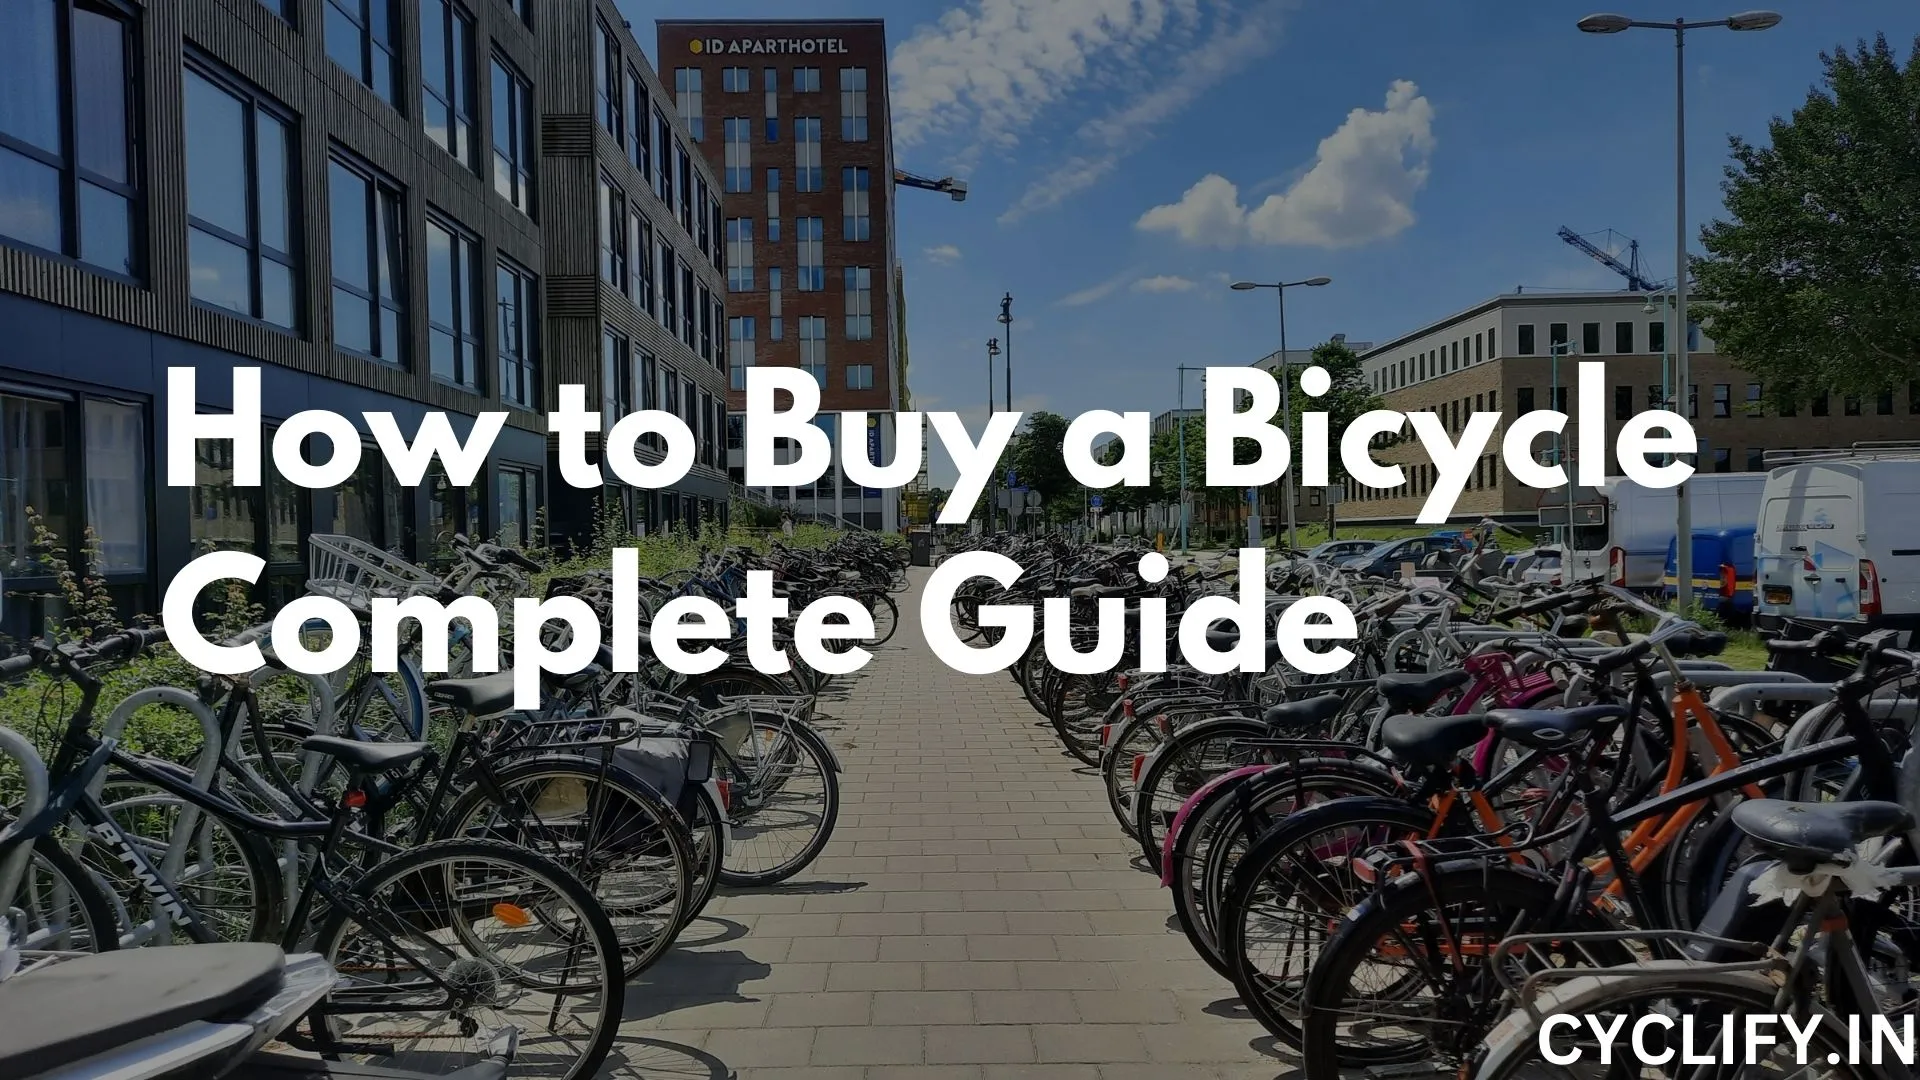 How to Buy a Bicycle for adults